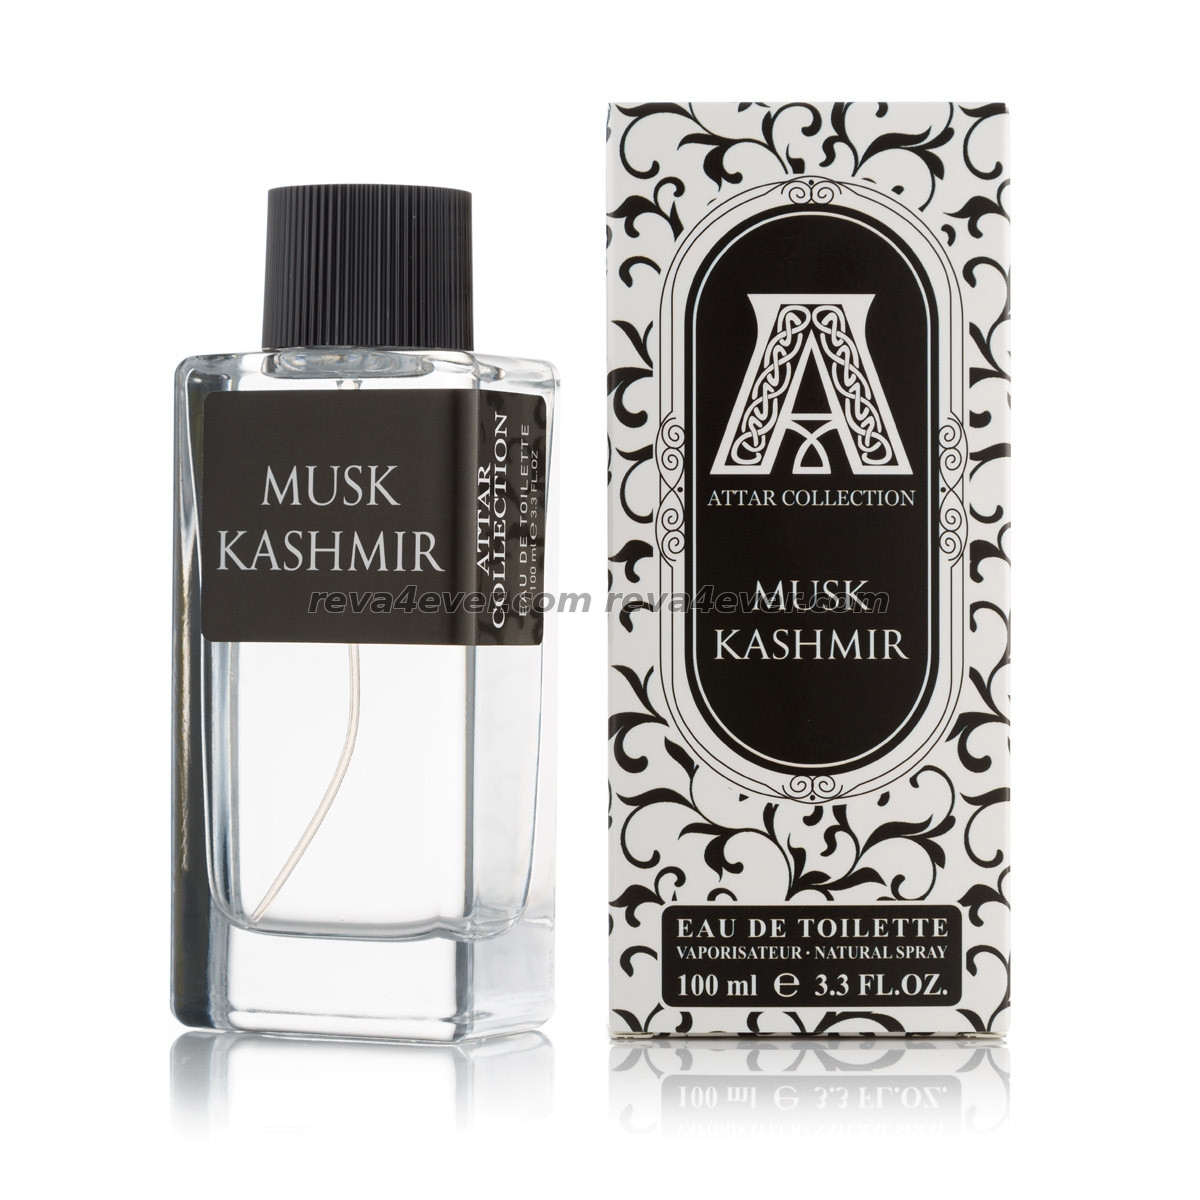 Attar Collection Musk Kashmir edt 100ml Imperatrice style